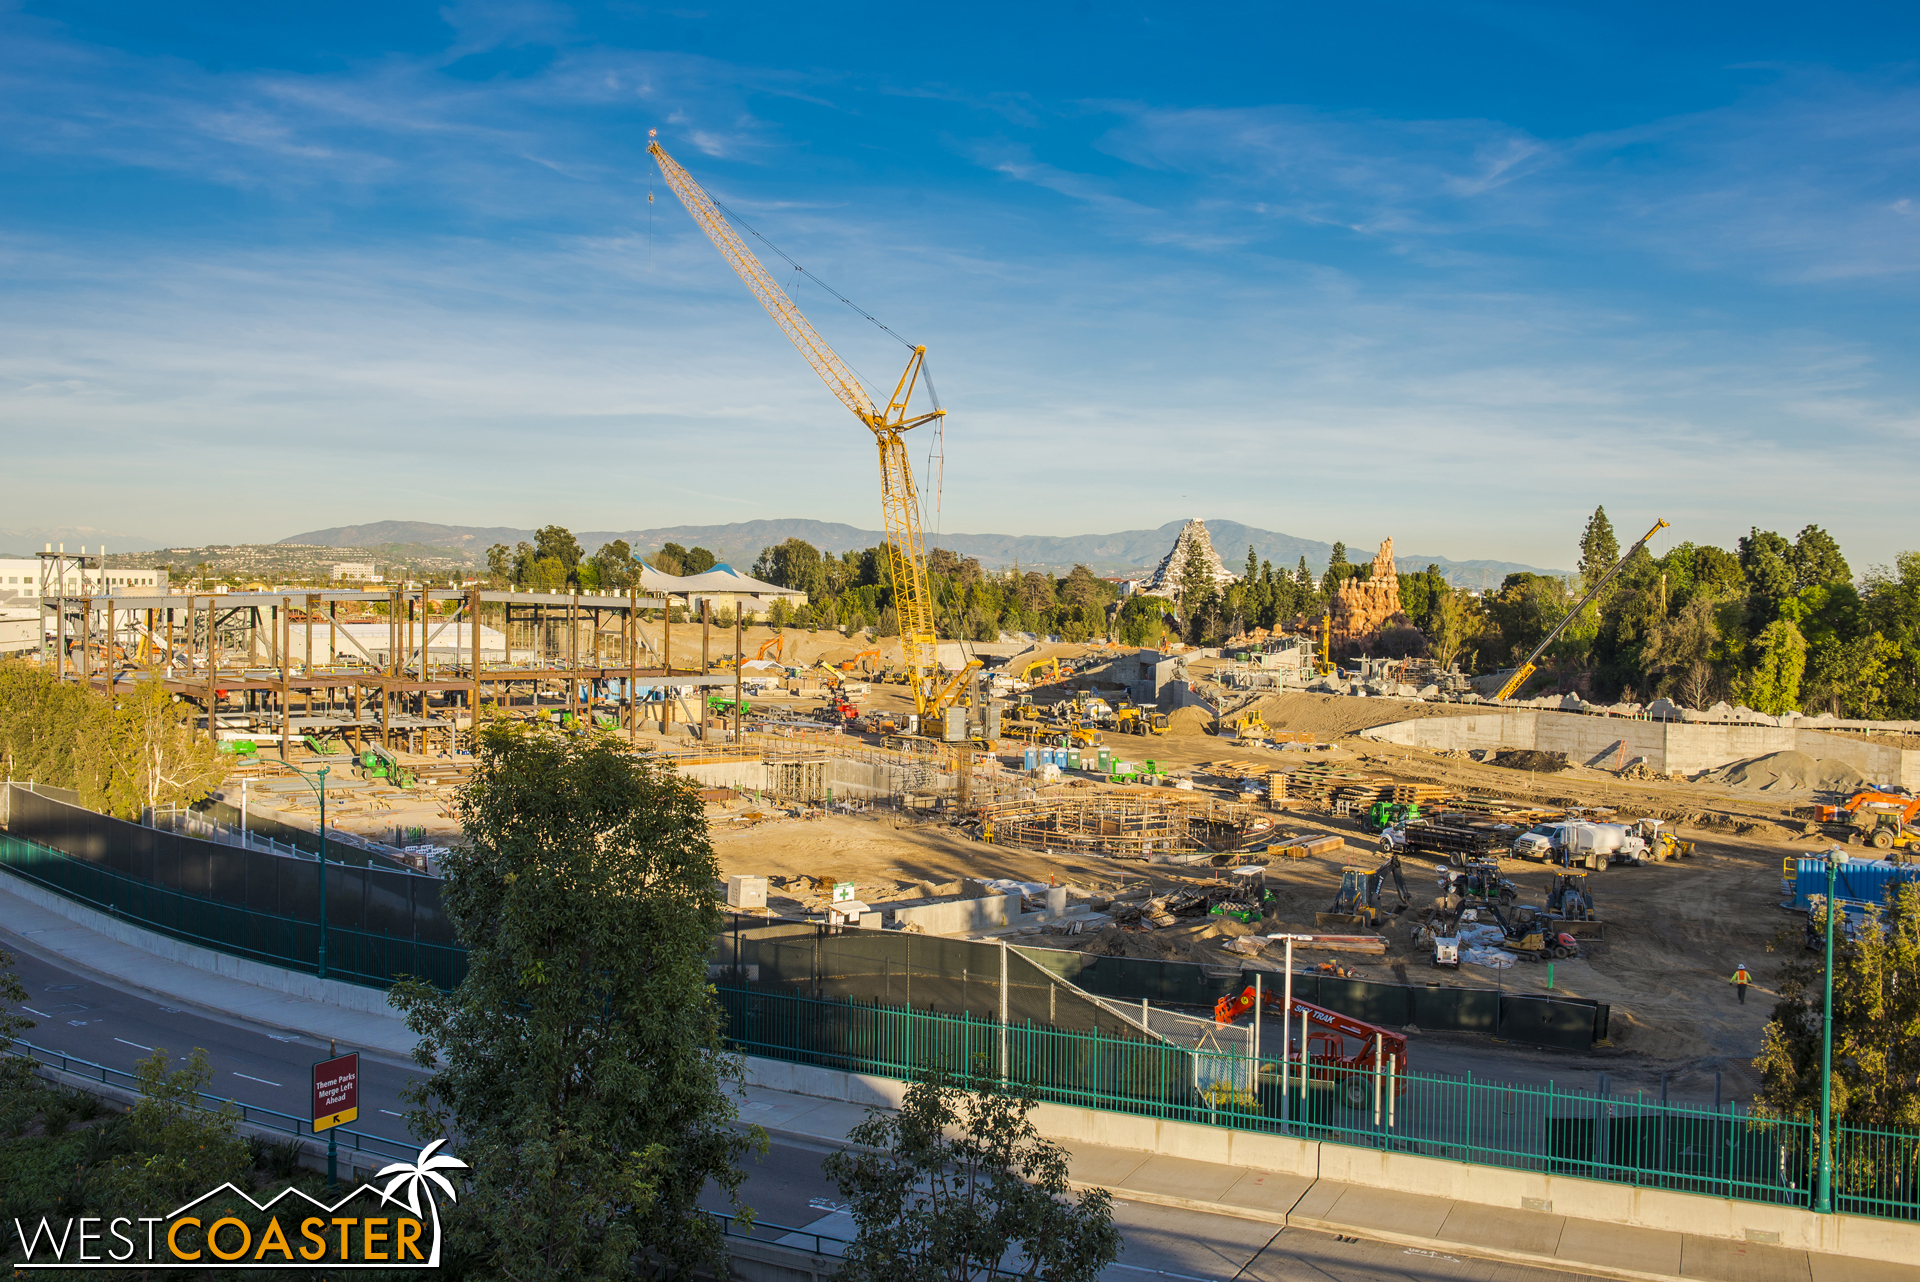  Lets look at the main E-Ticket first, which is shaping up to be quite a large sprawl of construction! 